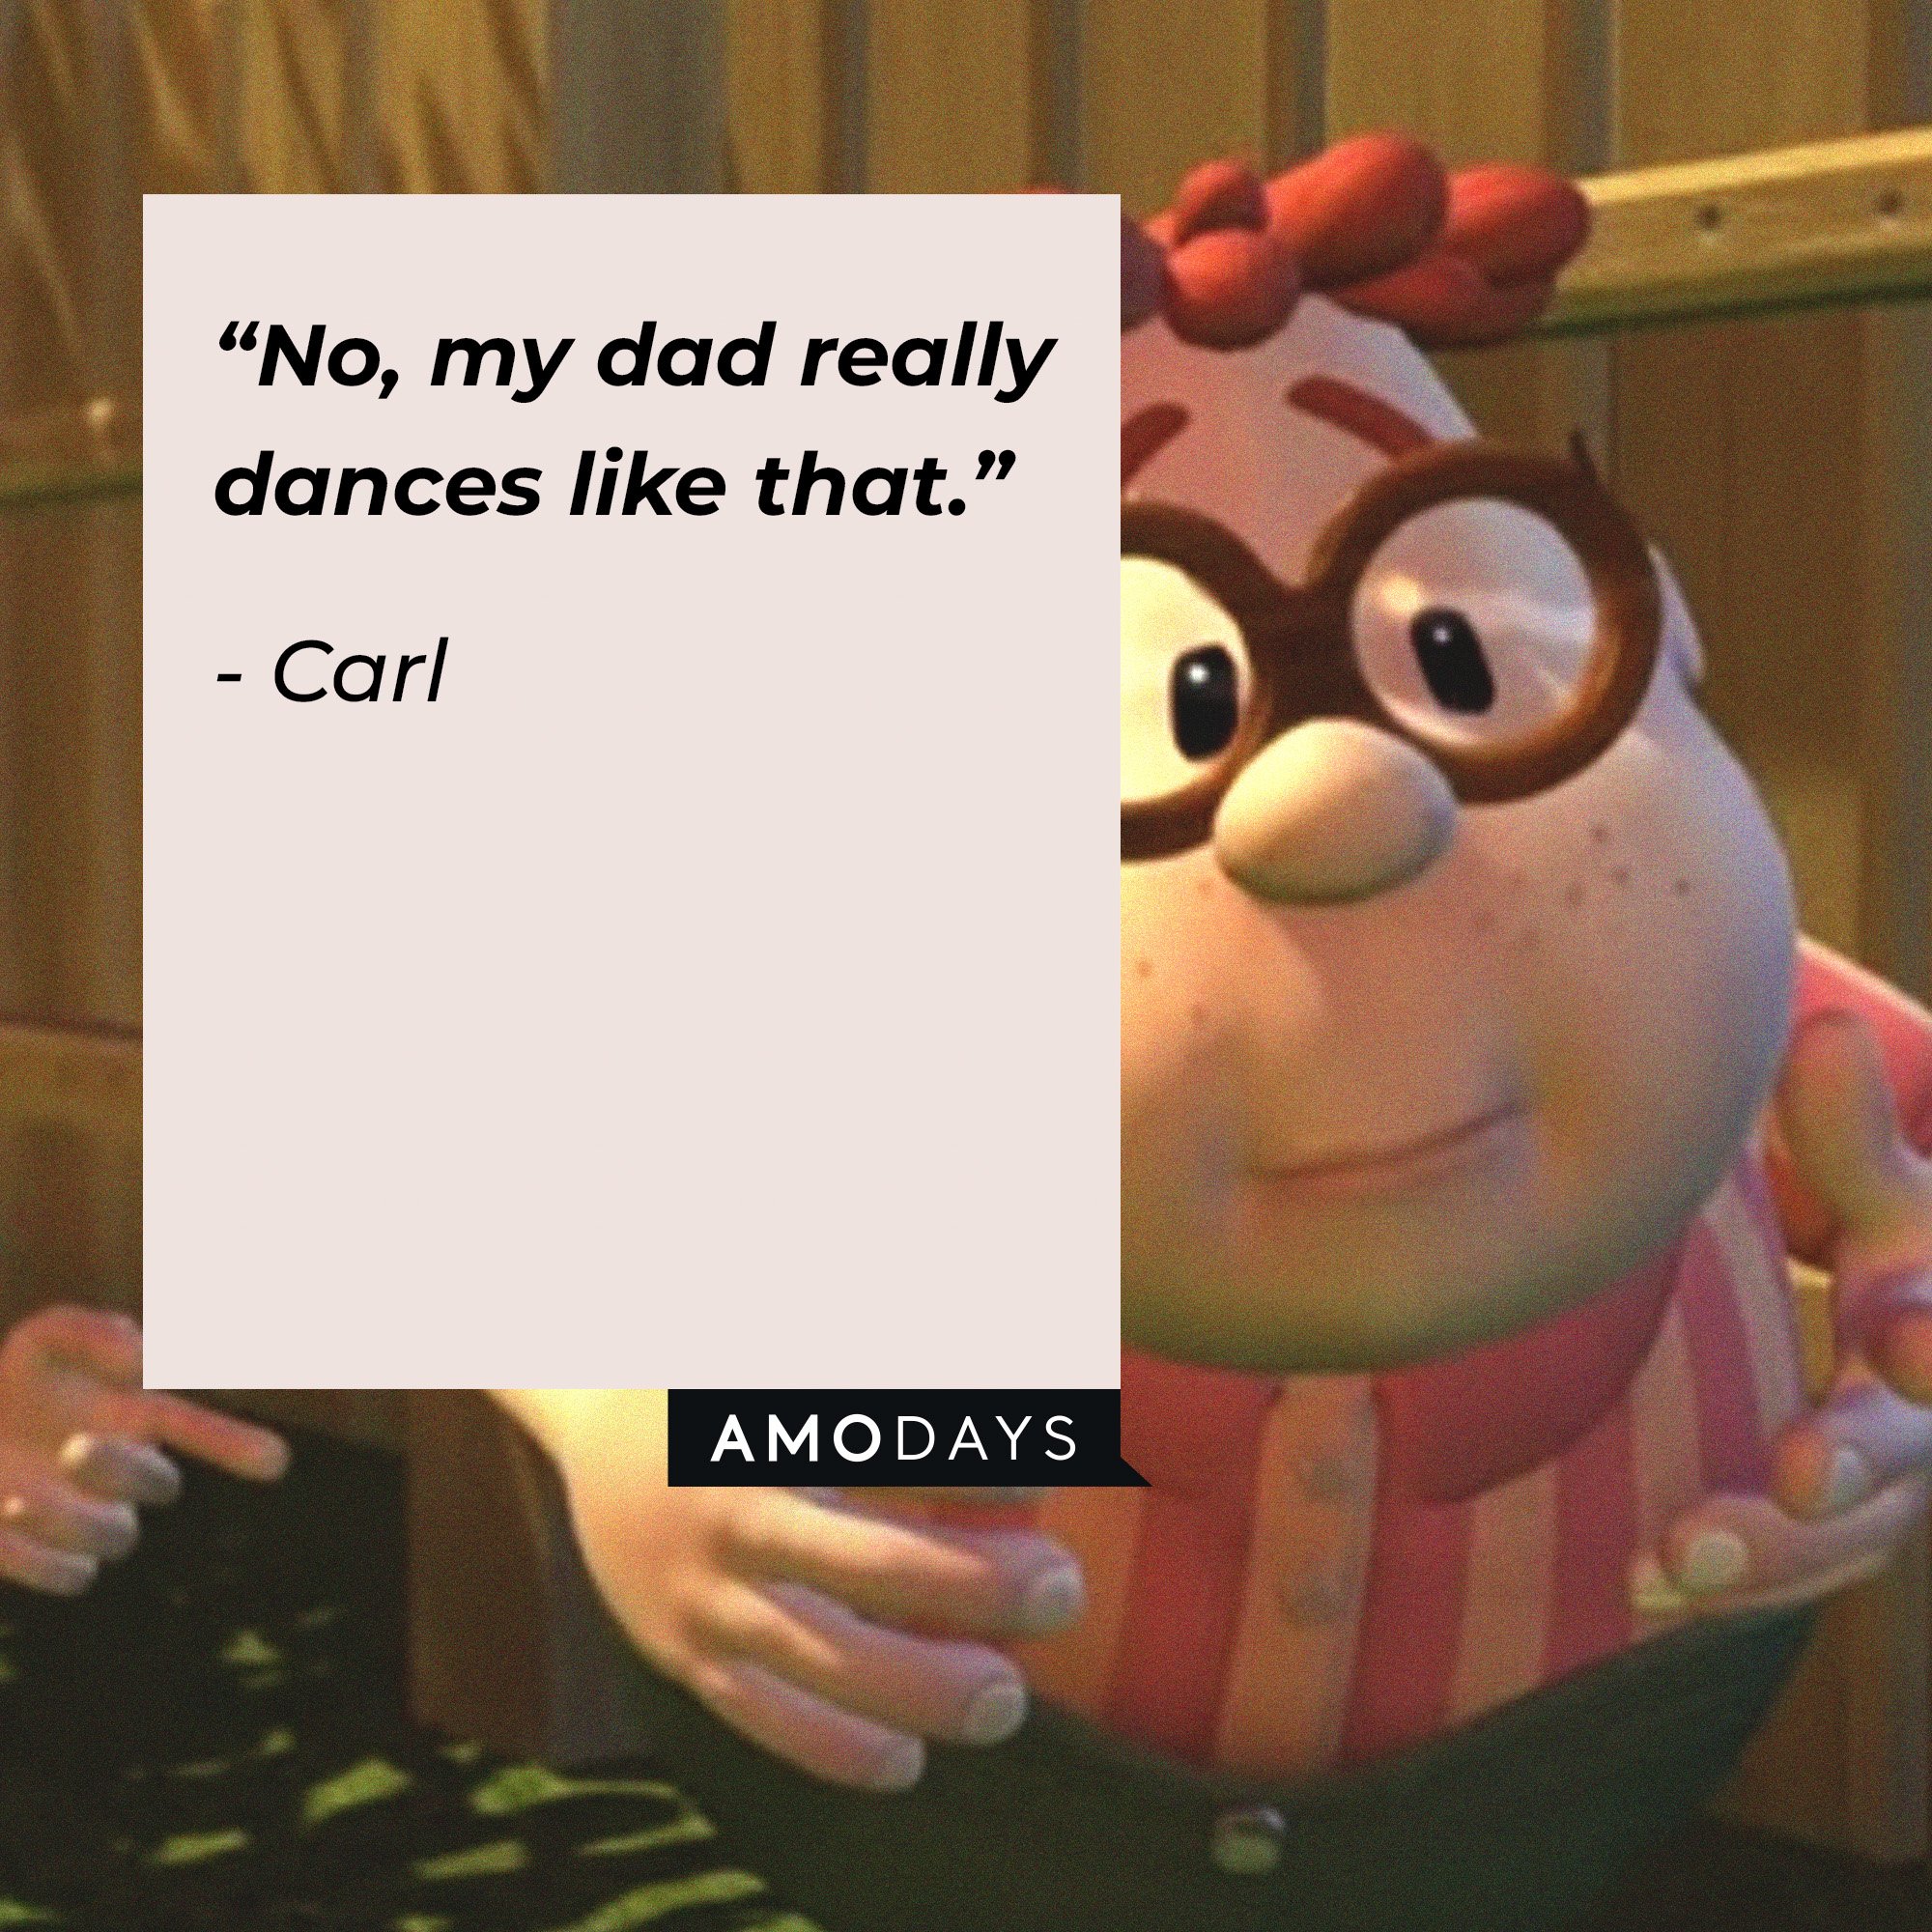 Carl’s quote: “No, my dad really dances like that.” | Image: AmoDays